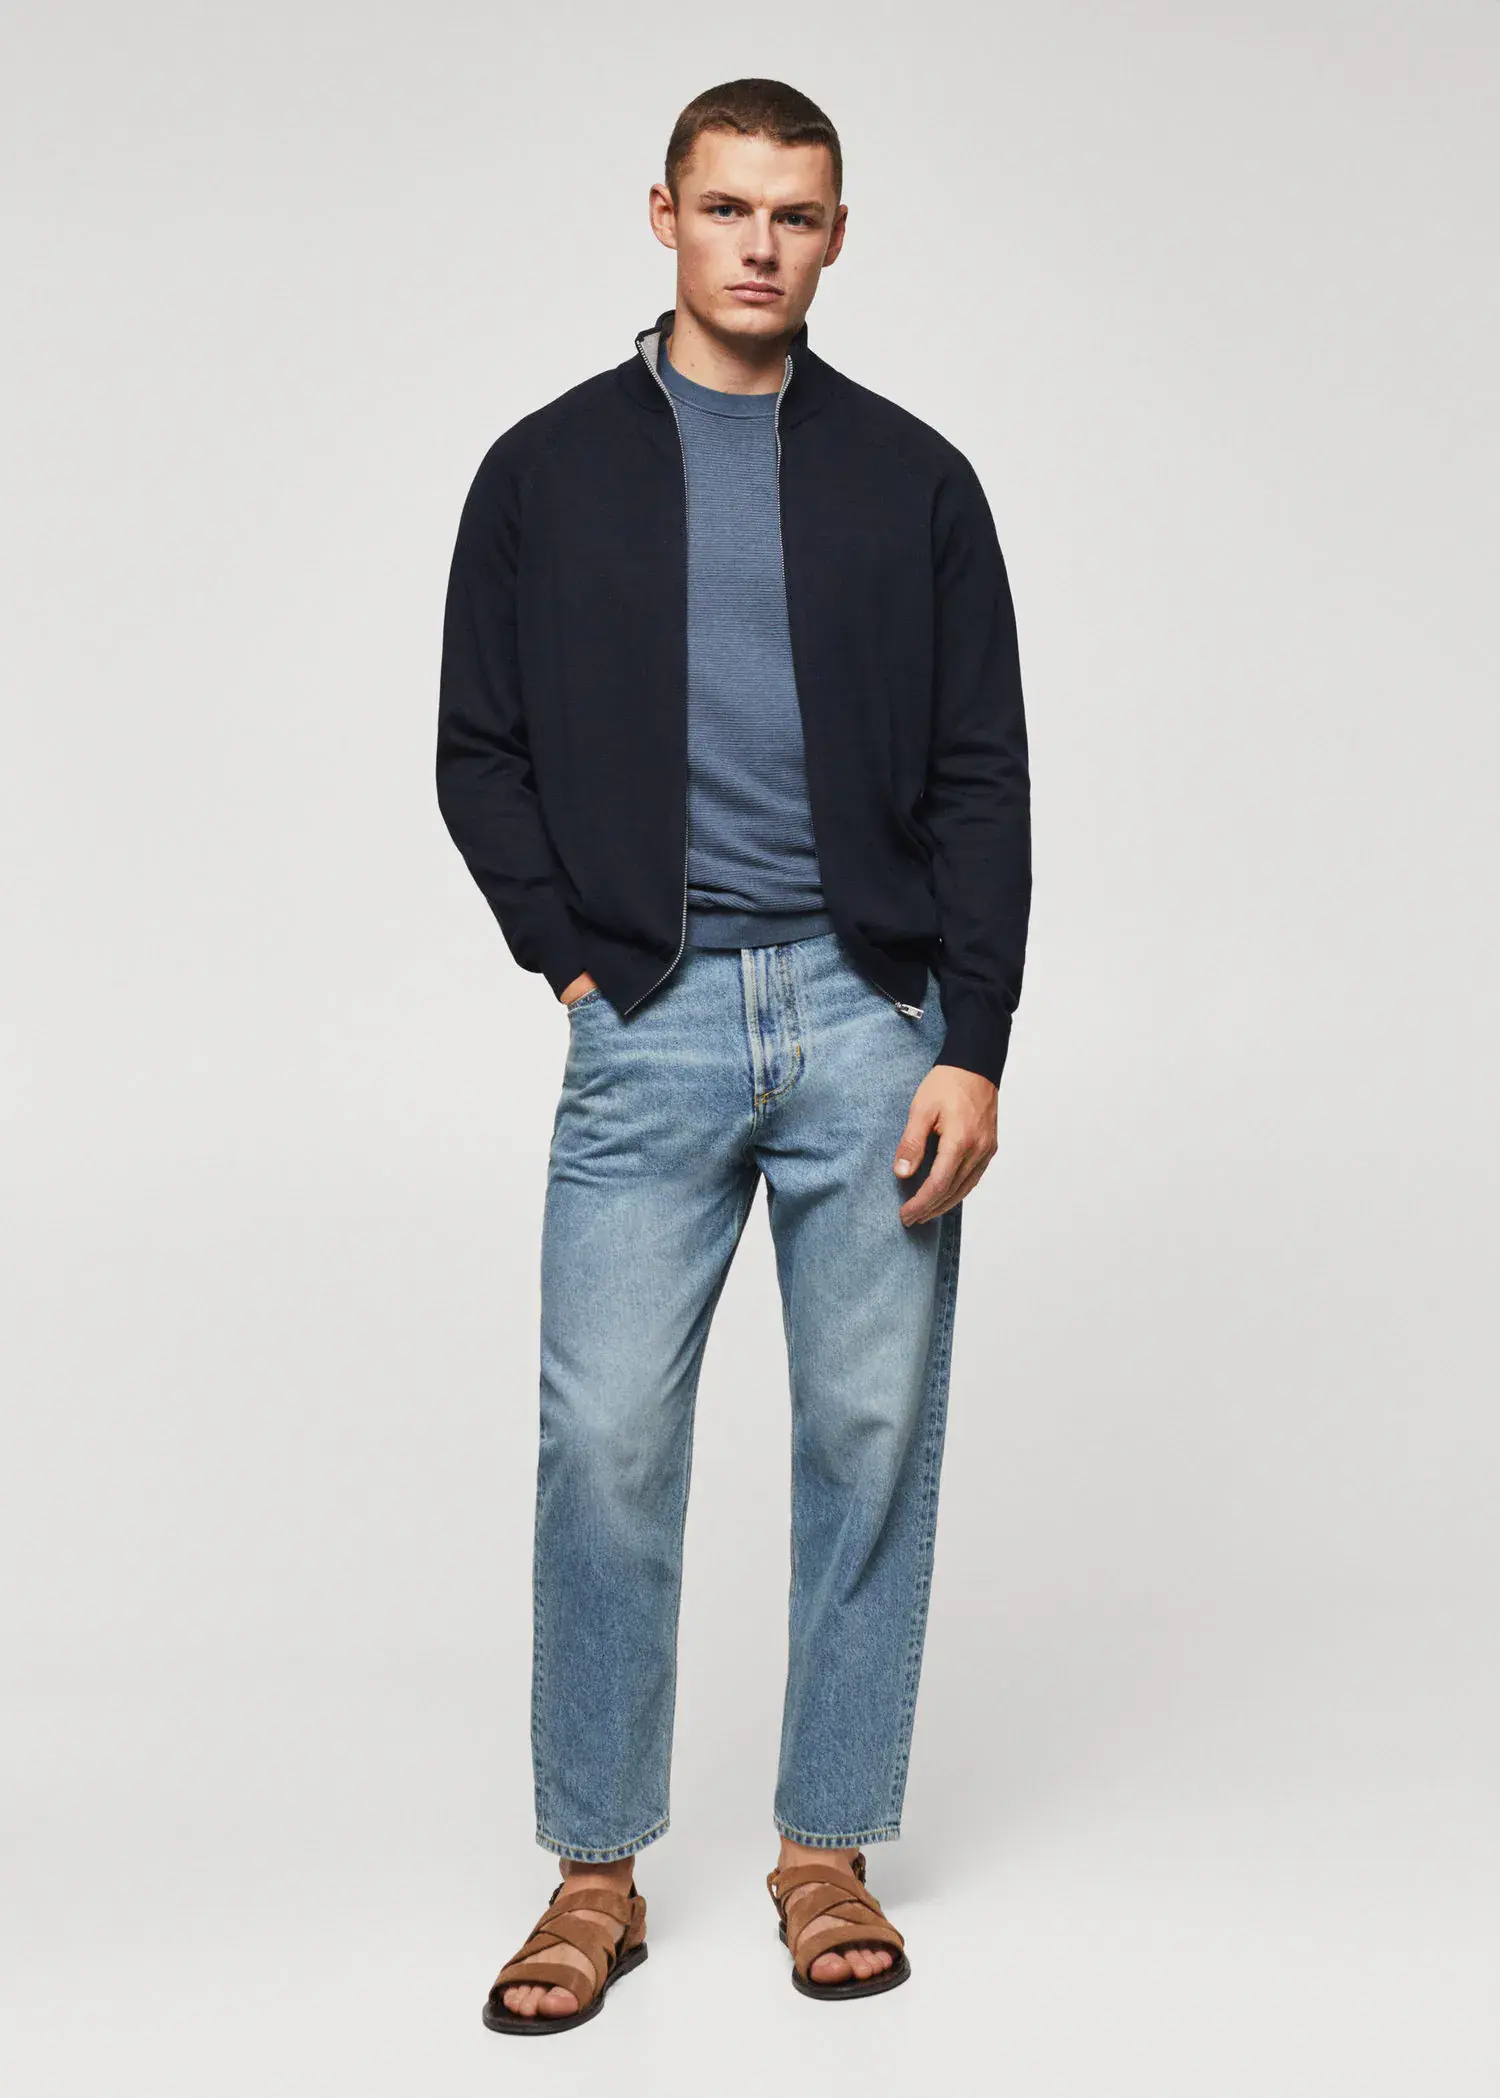 Mango Zipped cotton cardigan. a man in a black jacket and blue jeans. 